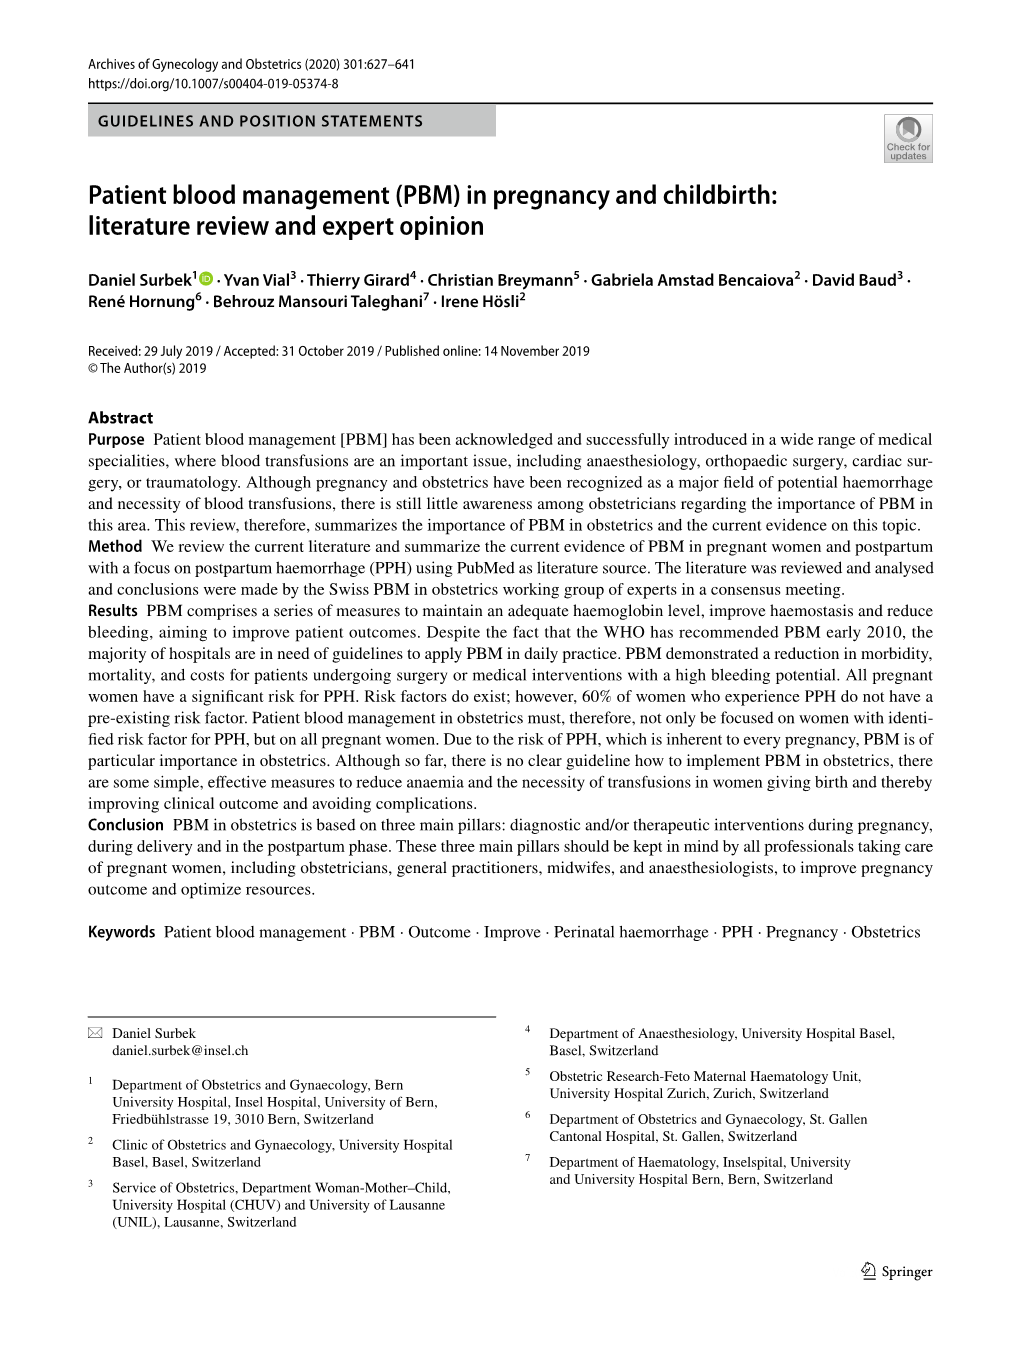 Patient Blood Management (PBM) in Pregnancy and Childbirth: Literature Review and Expert Opinion